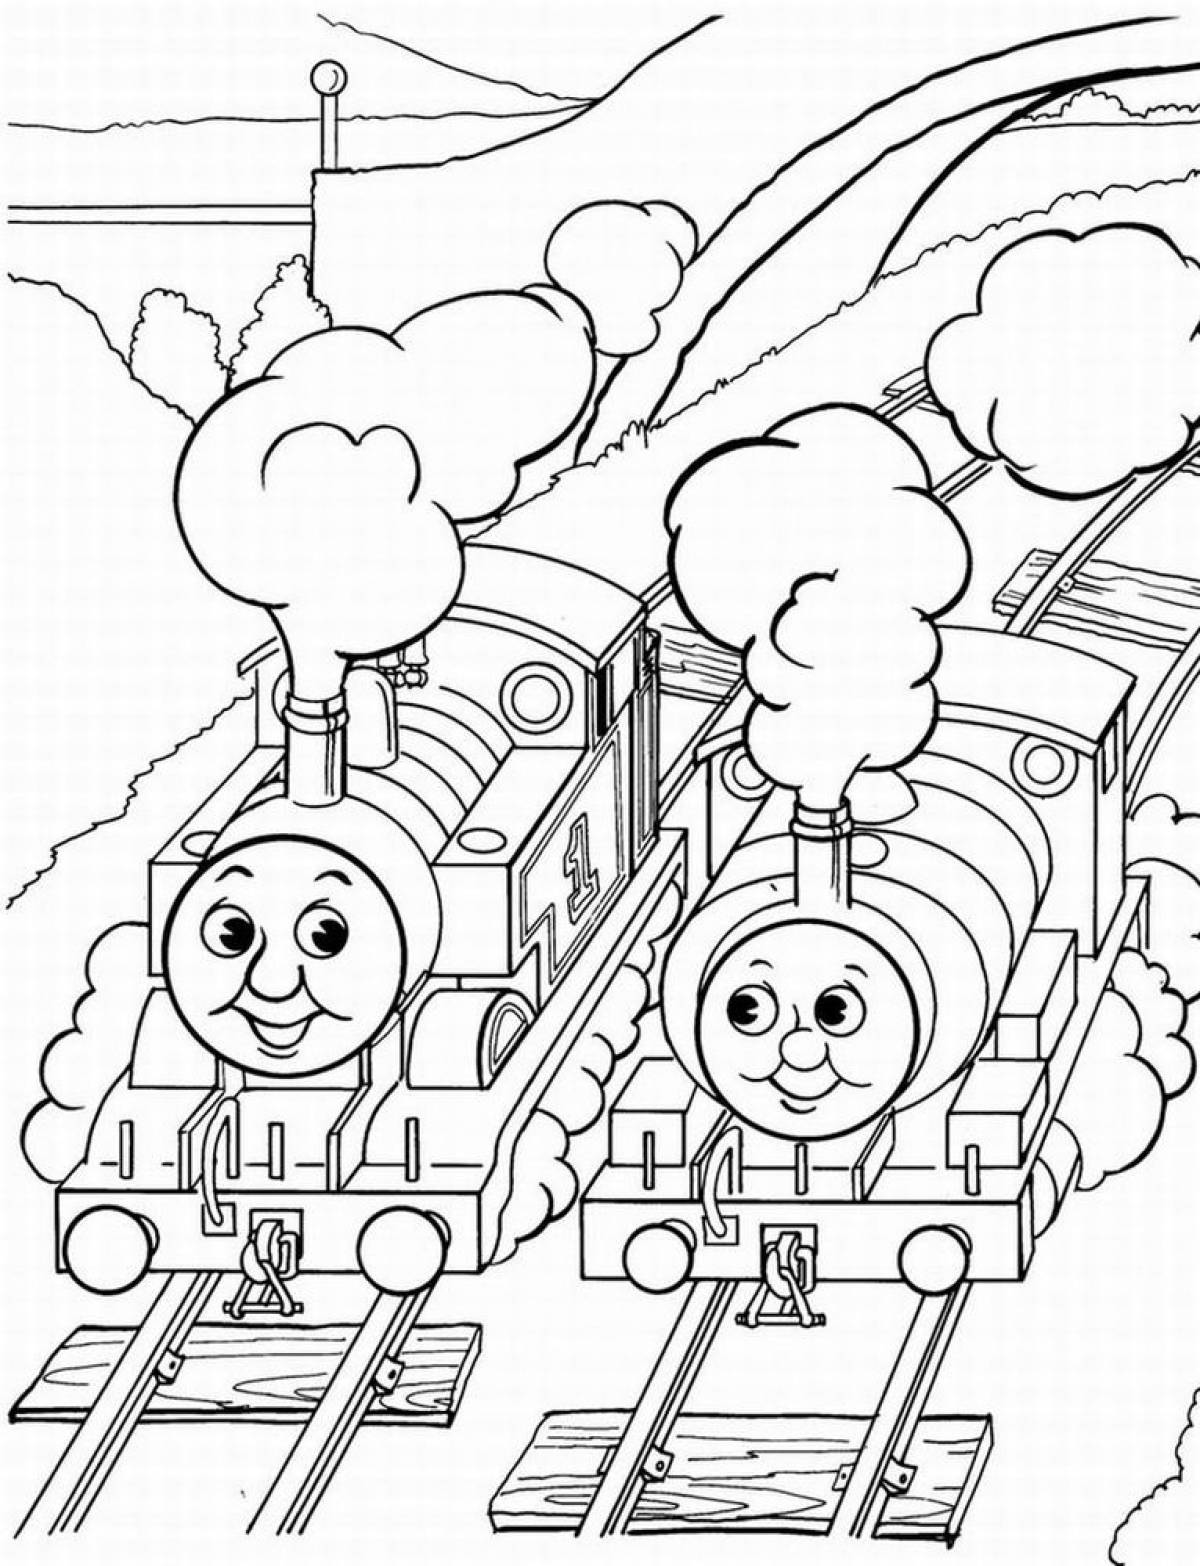 Drawing of a locomotive